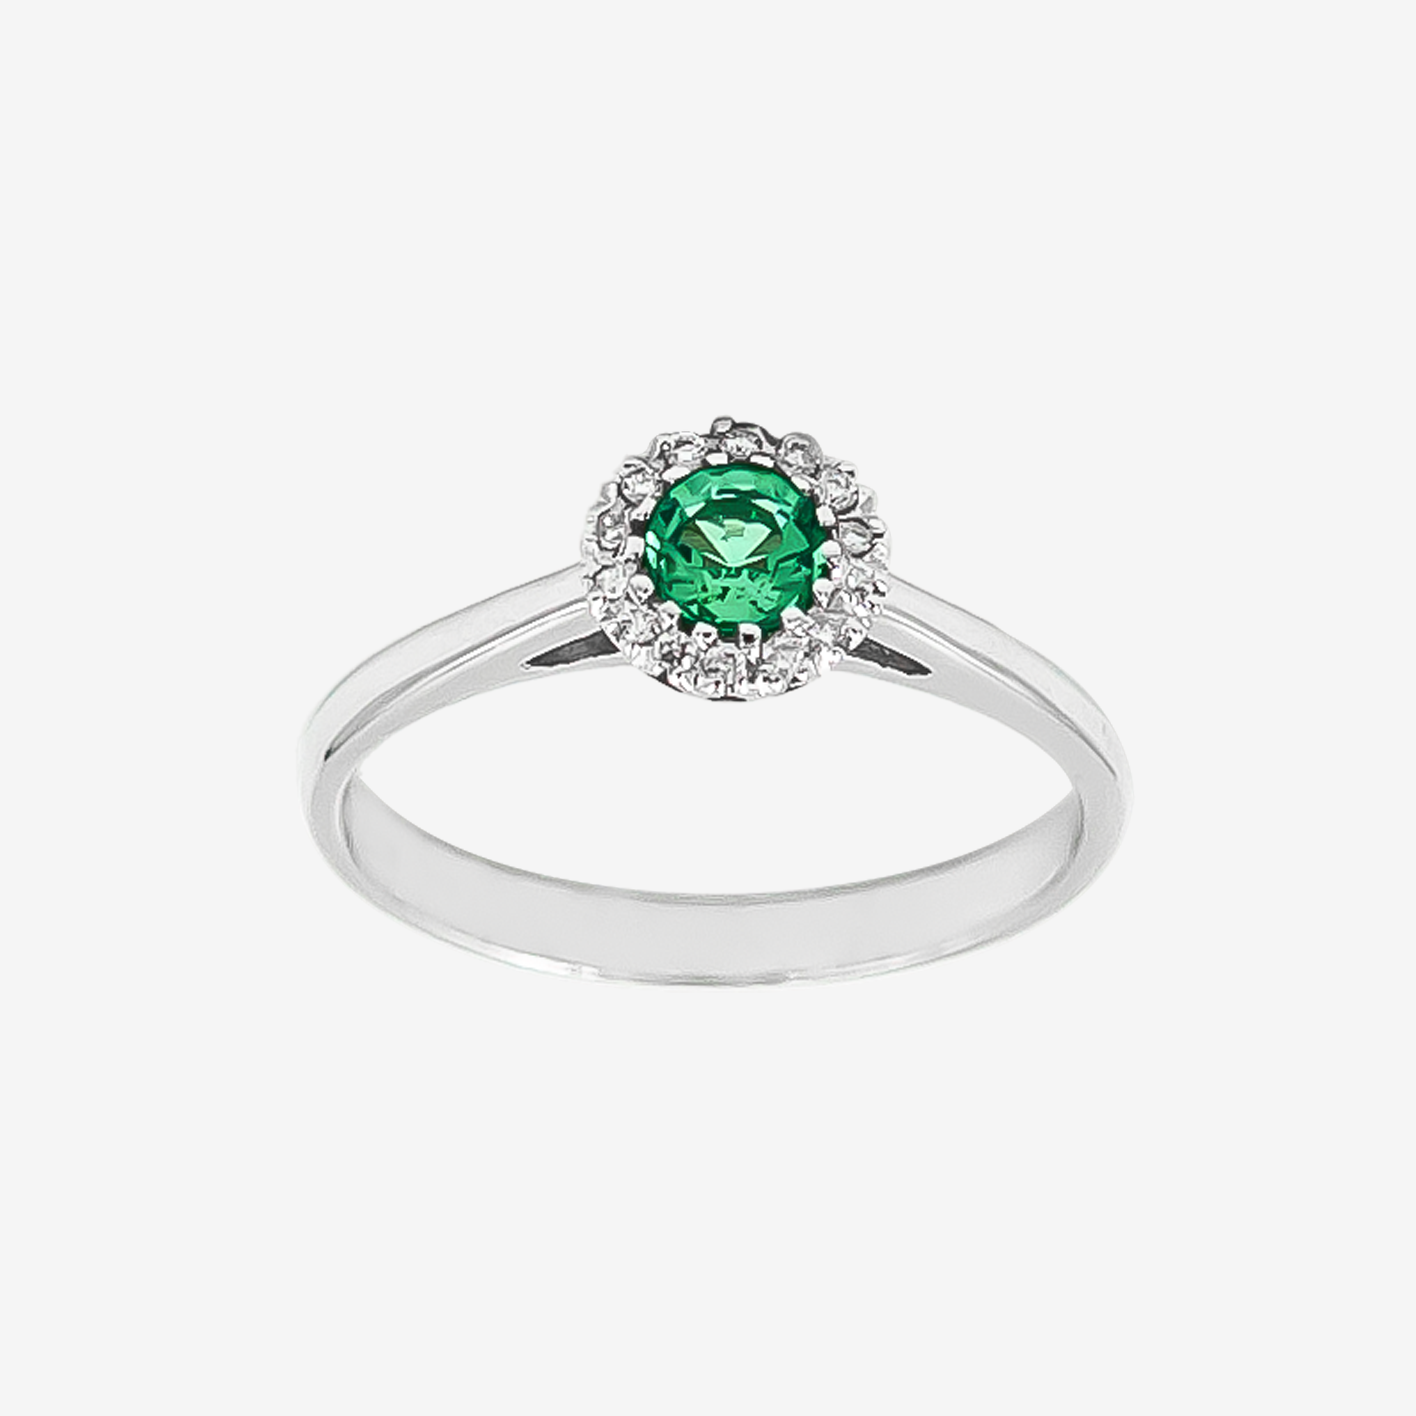 Spotlight Ring with Emerald and Diamonds